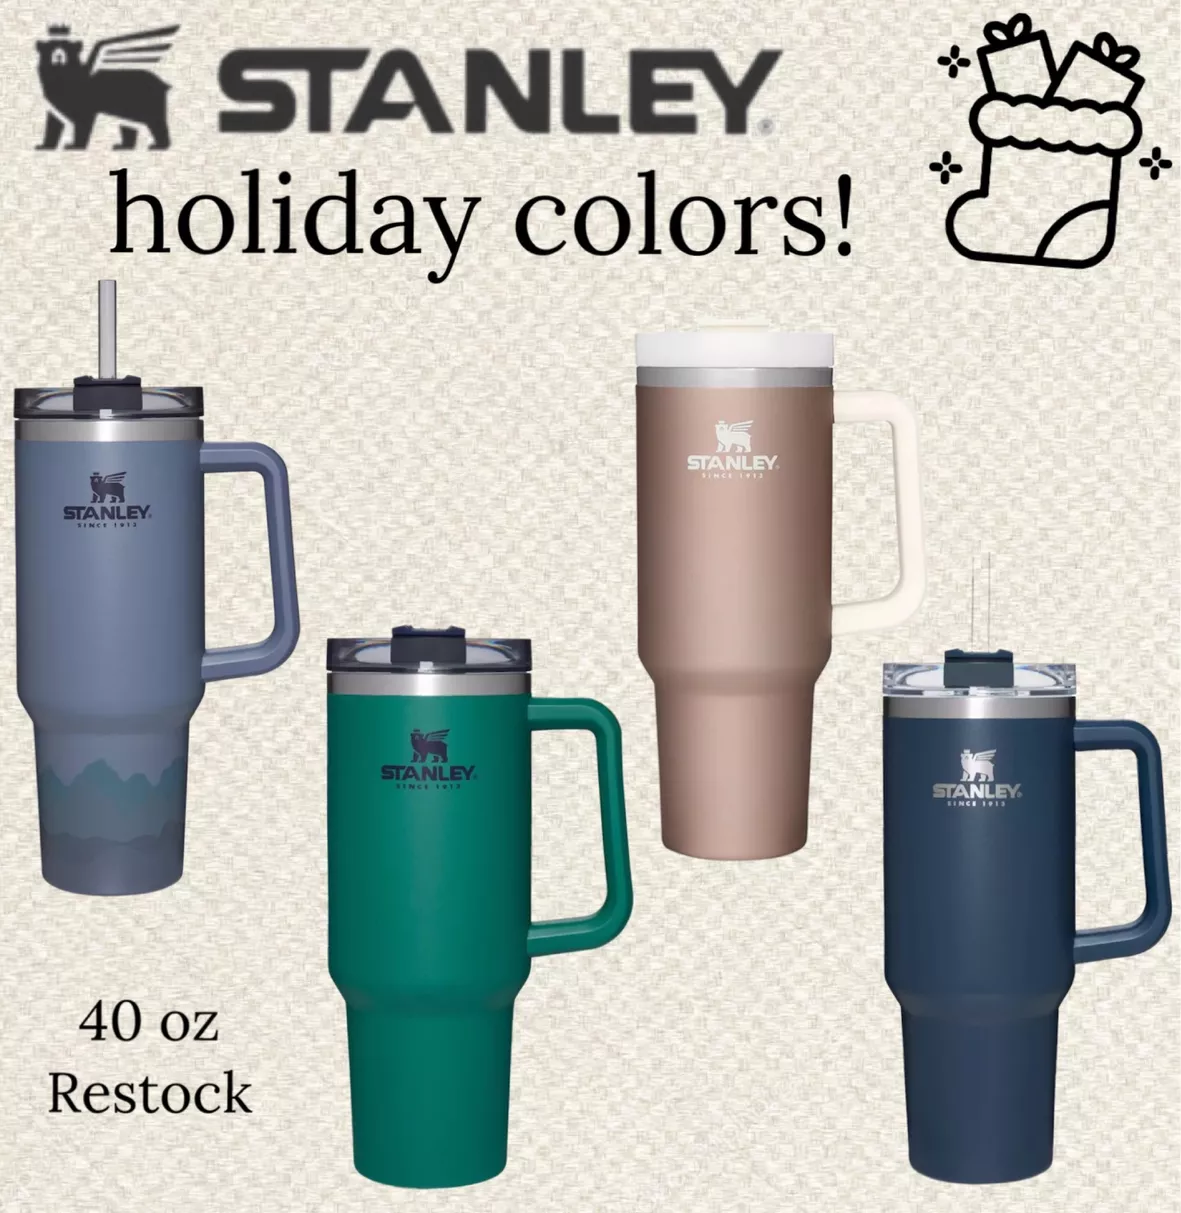 Stanley 40 oz. Quencher Tumbler curated on LTK